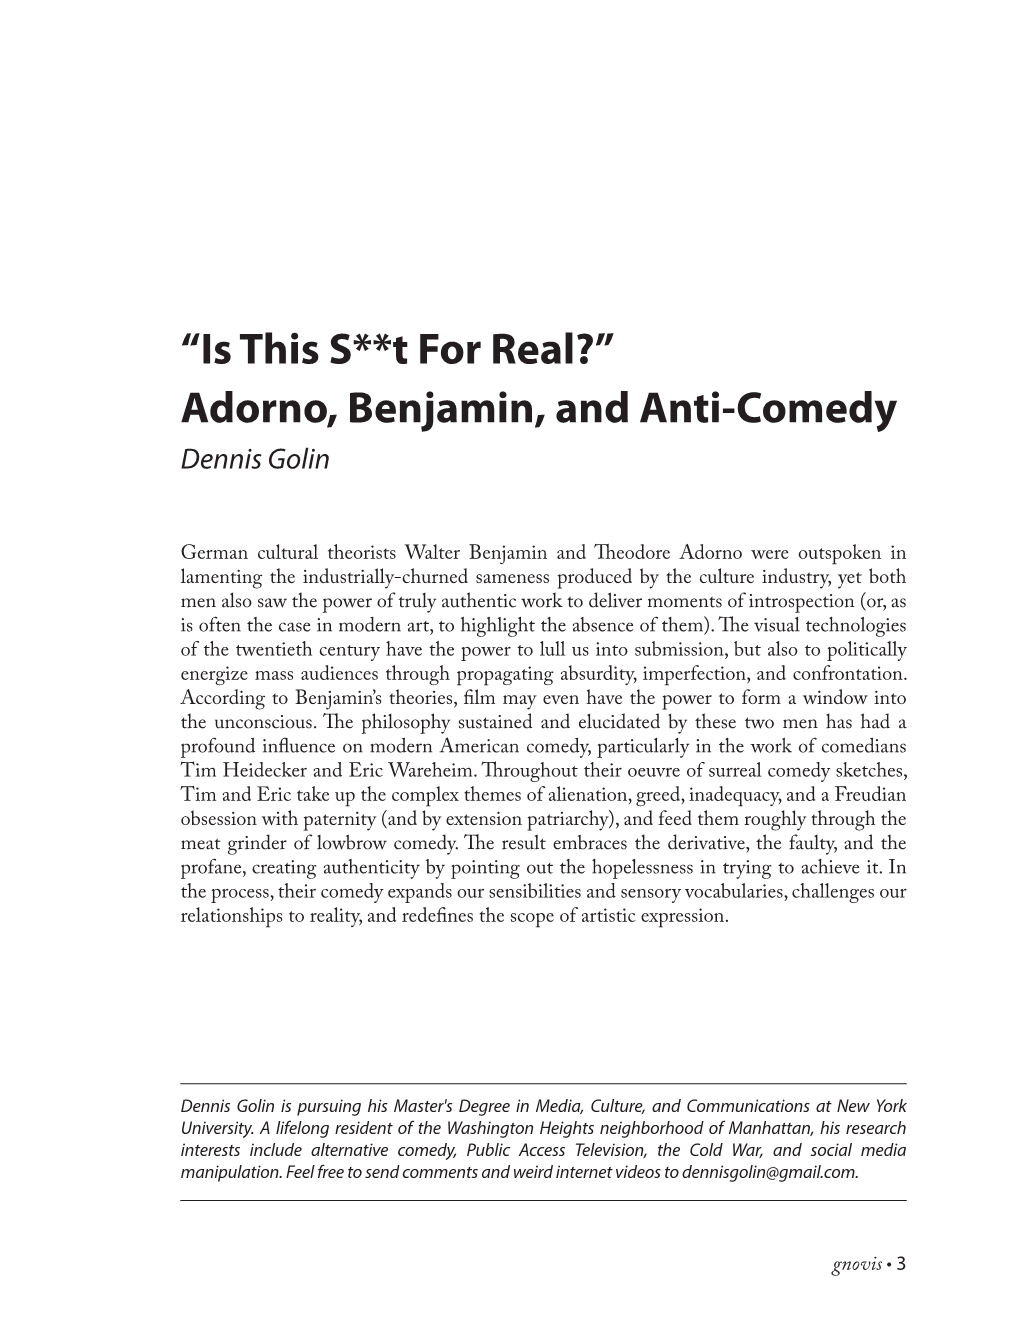 “Is This S**T for Real?” Adorno, Benjamin, and Anti-Comedy Dennis Golin